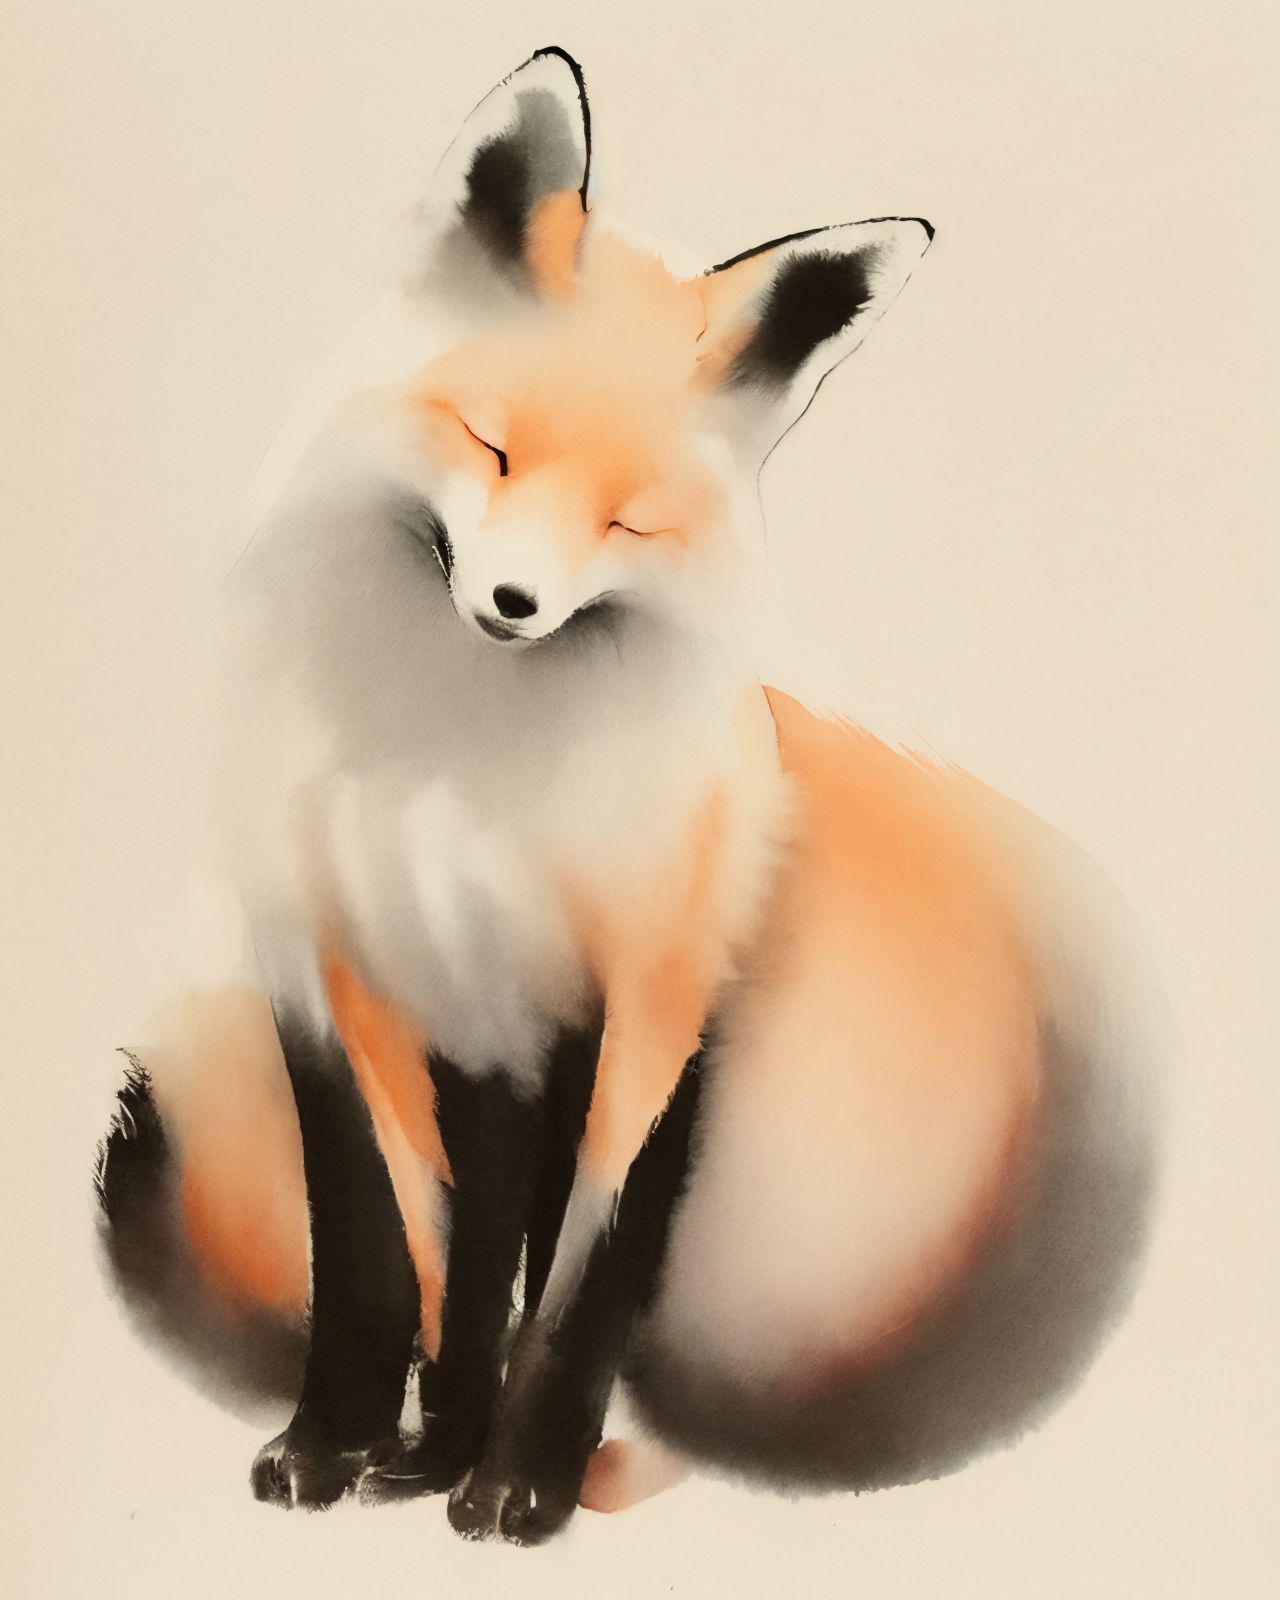 A fox sits with its eyes closed, looking peaceful.